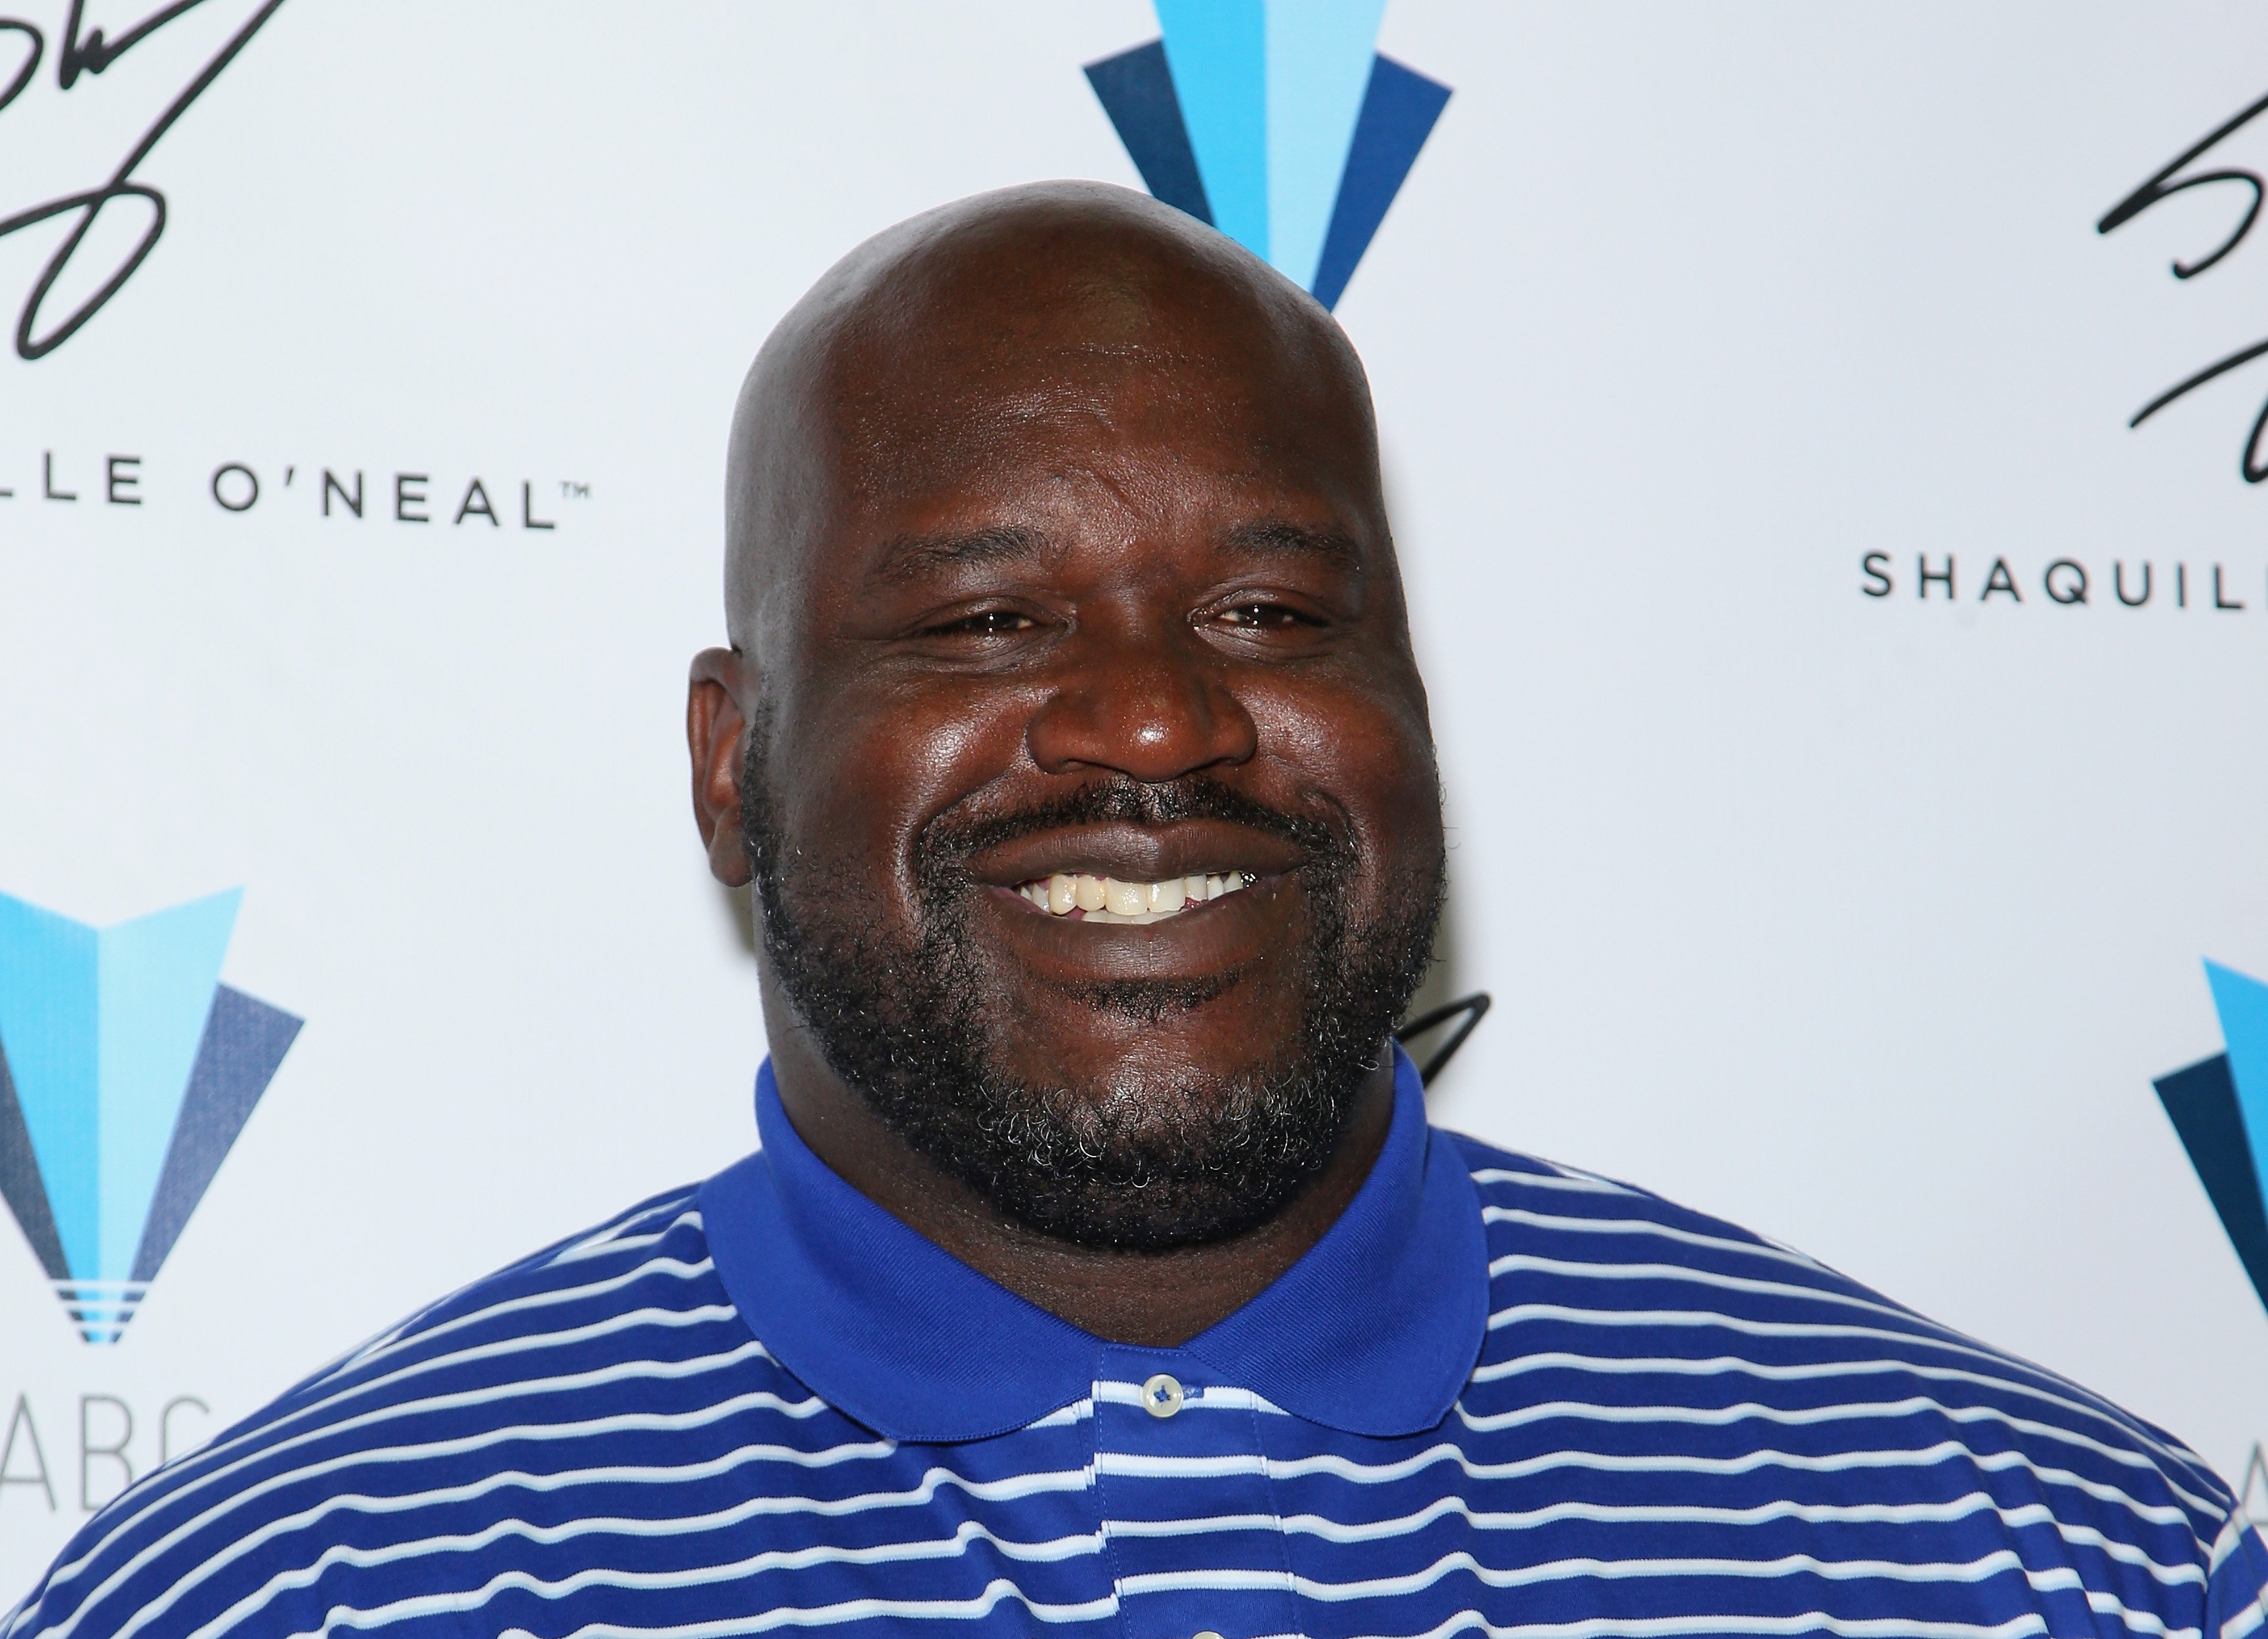 Shaquille O'Neal at the Licensing Expo 2016 at the Mandalay Bay Convention Center on June 21, 2016 | Photo: Getty Images